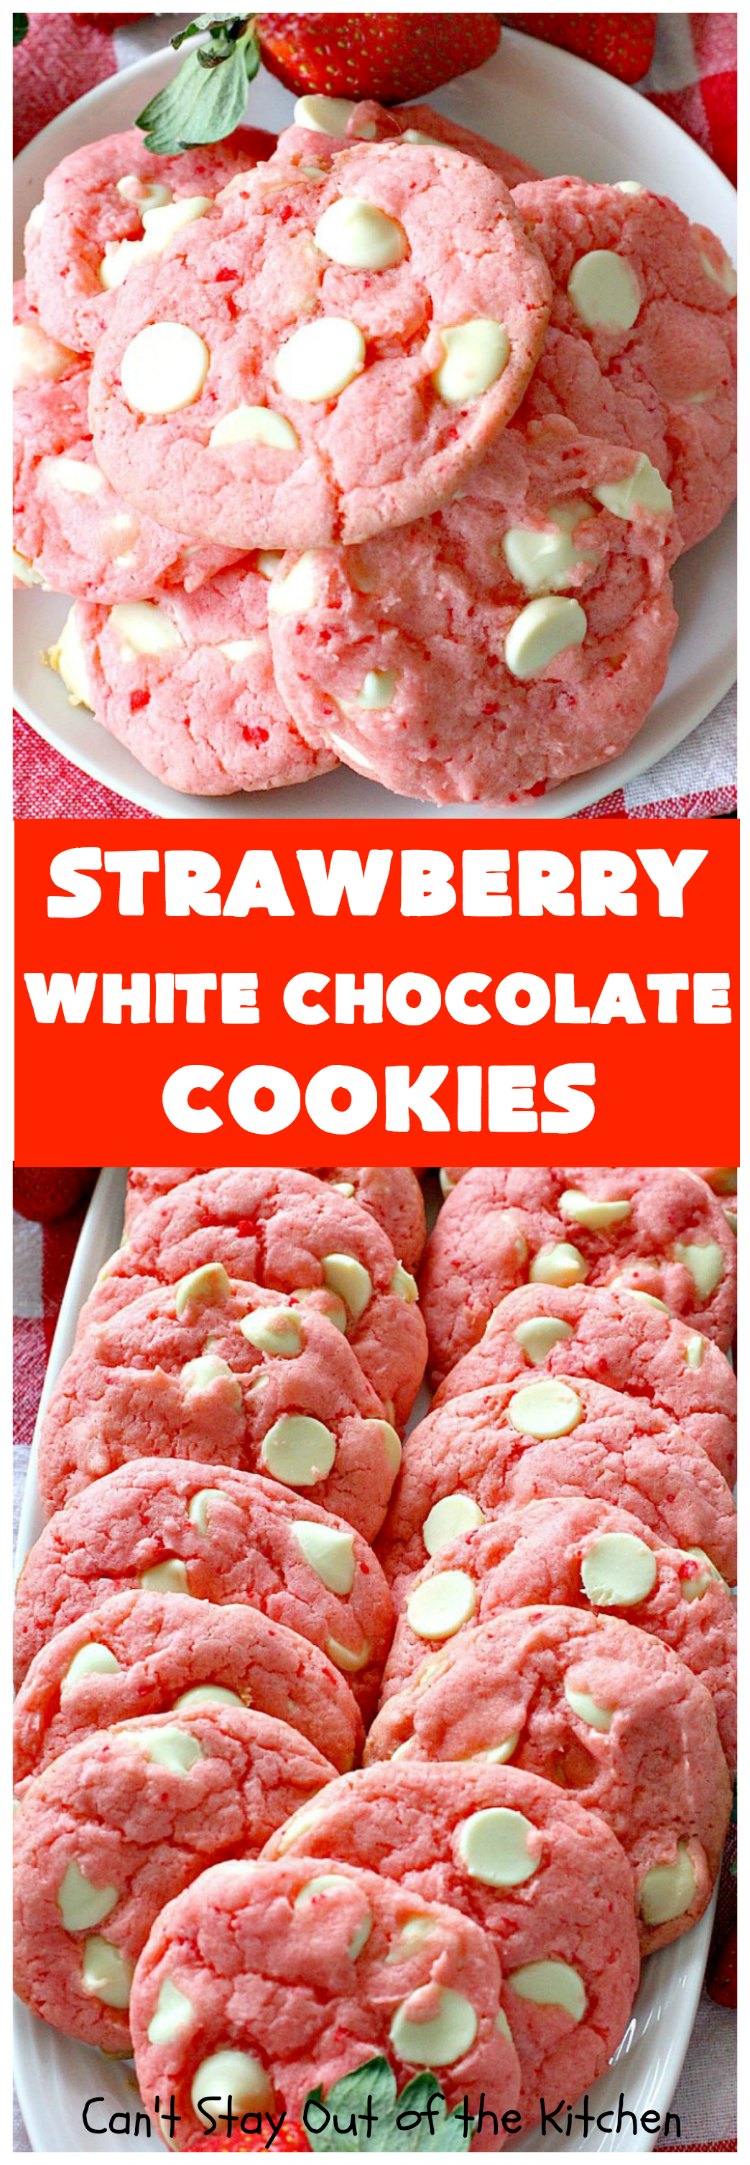 Strawberry White Chocolate Cookies | Can't Stay Out of the Kitchen